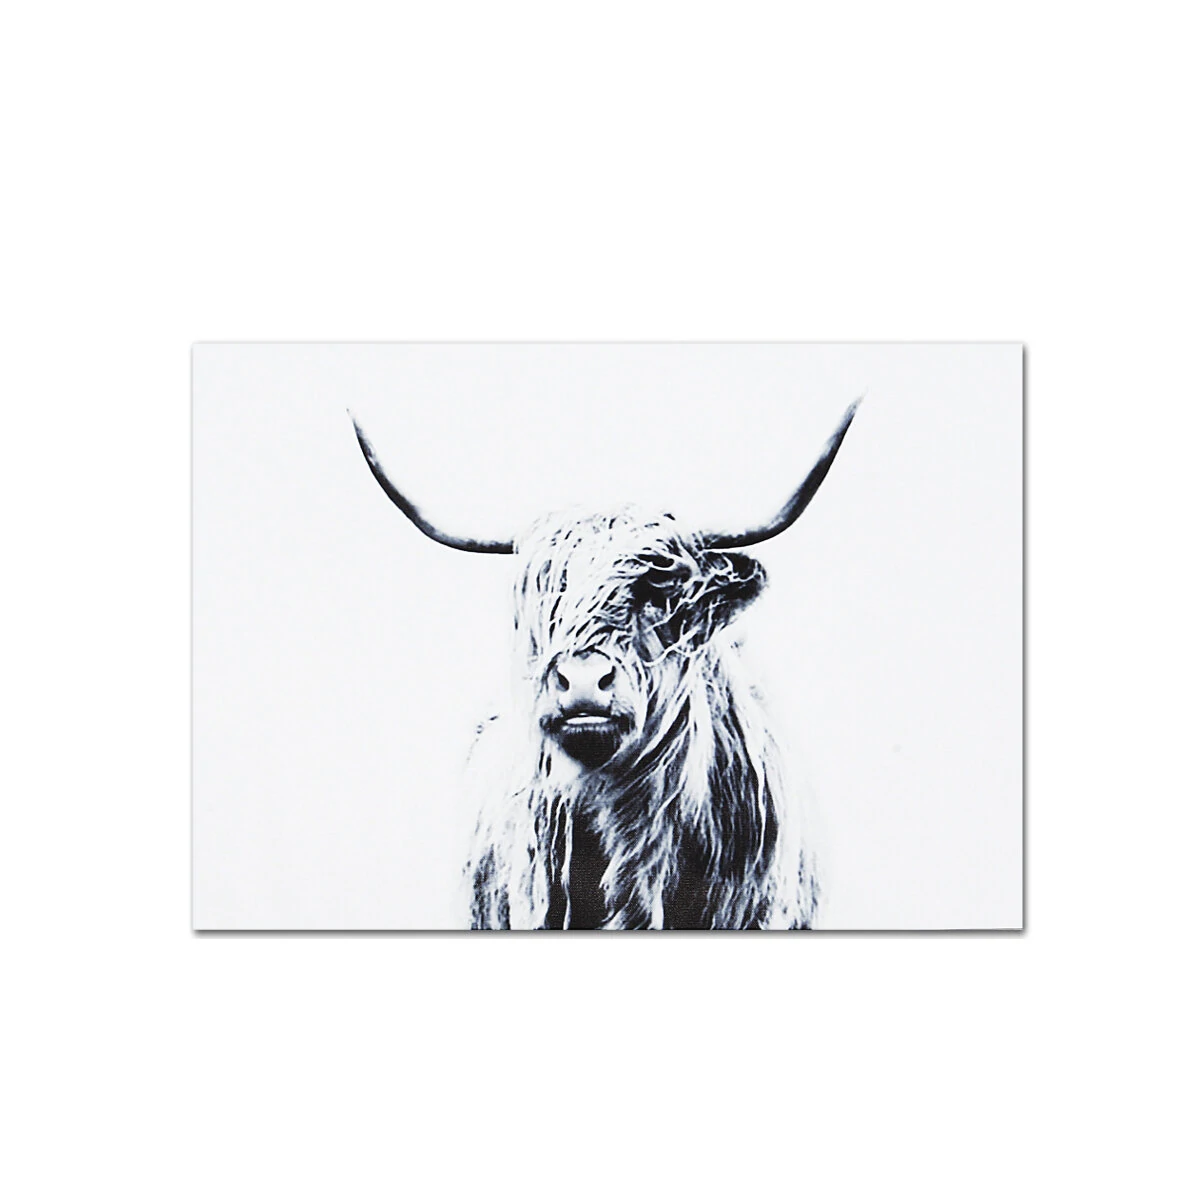 1 piece highland cattle canvas painting wall decorative print art pictures frameless wall hanging decorations for home office